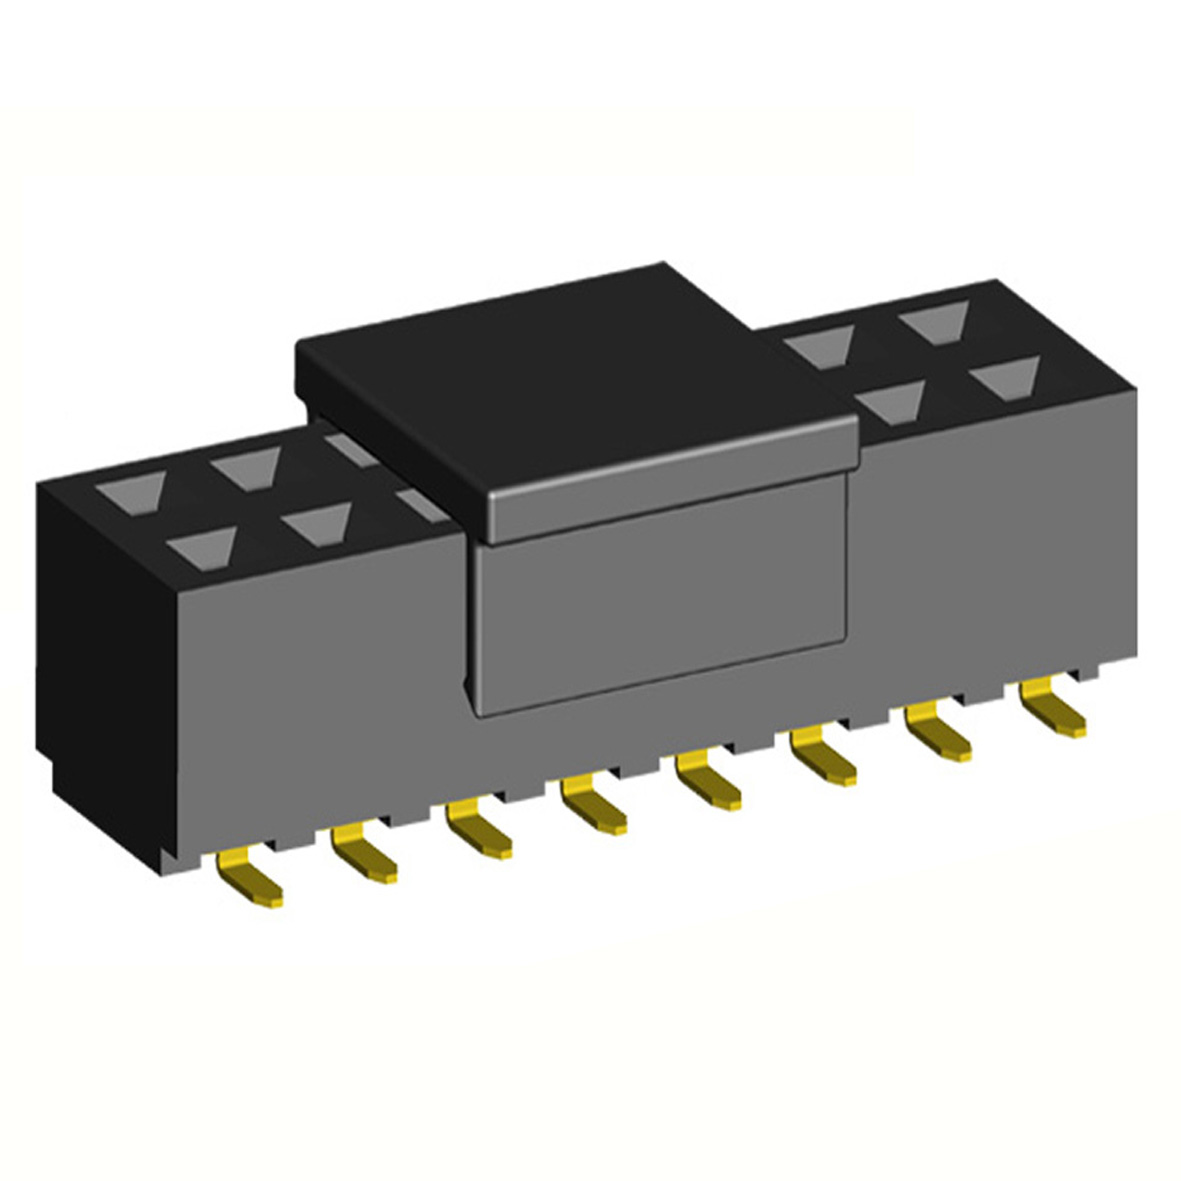 2214SM-XXG-50-PCP series, double row straight sockets on Board for surface mounting (SMD) with gripper, pitch 2,54x2,54 mm, Board-to-Board connectors, pin headers and sockets > pitch 2,54x2,54 mm